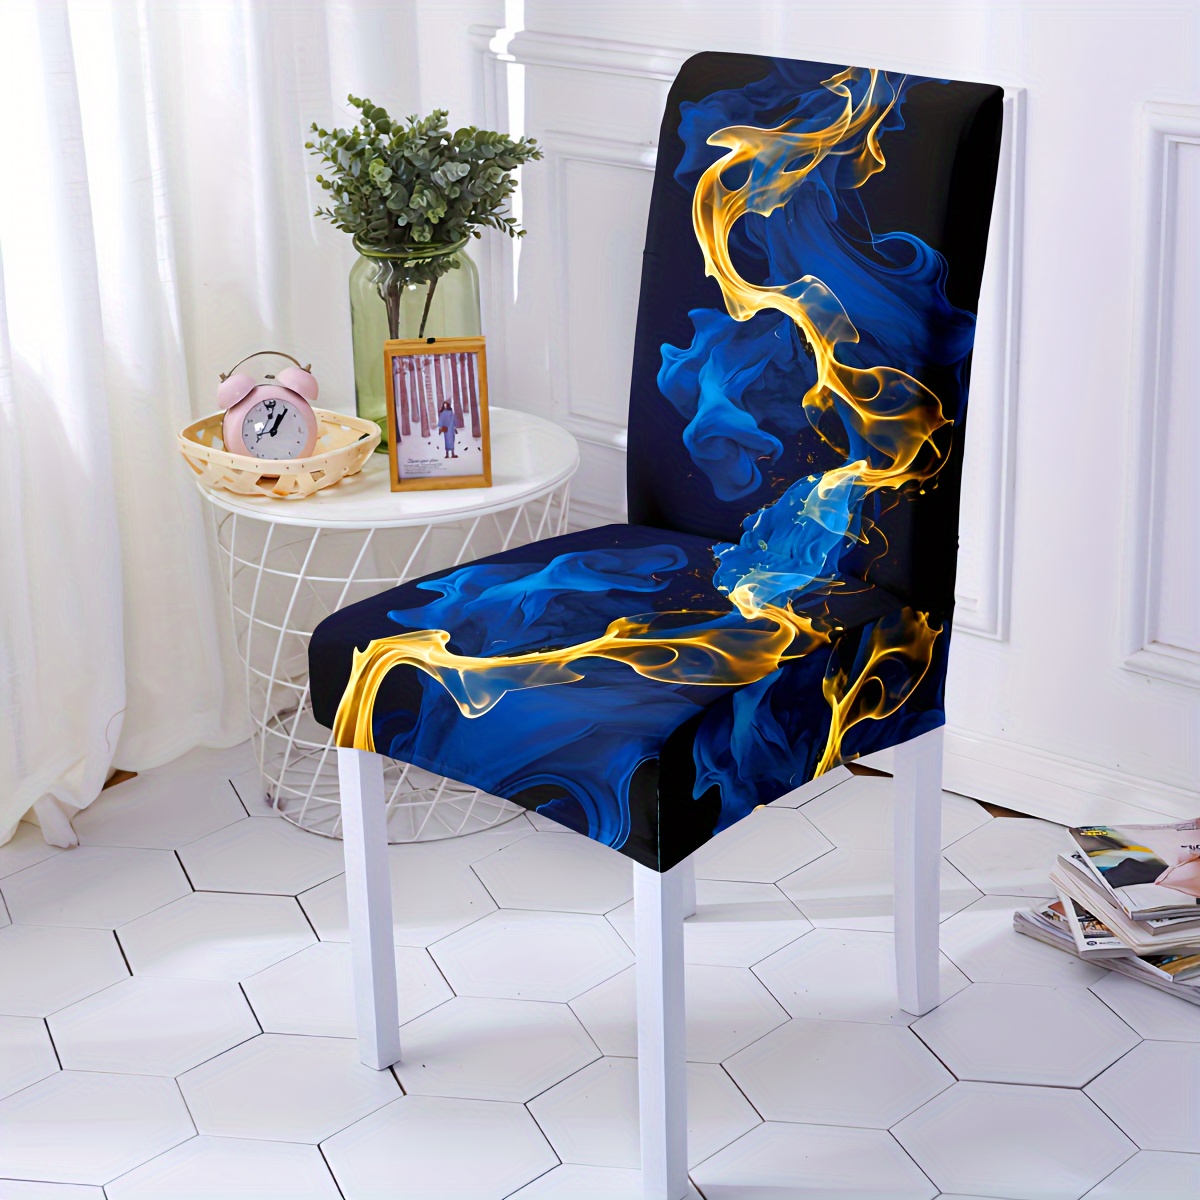 

4pcs/6pcs Blue & Metallic Accent Marble Pattern Dining Chair Covers, Digital Print Stretch Slipcovers For Restaurants, Hotels, Ceremonies & Festive Decor, Machine Washable Polyester-spandex Blend